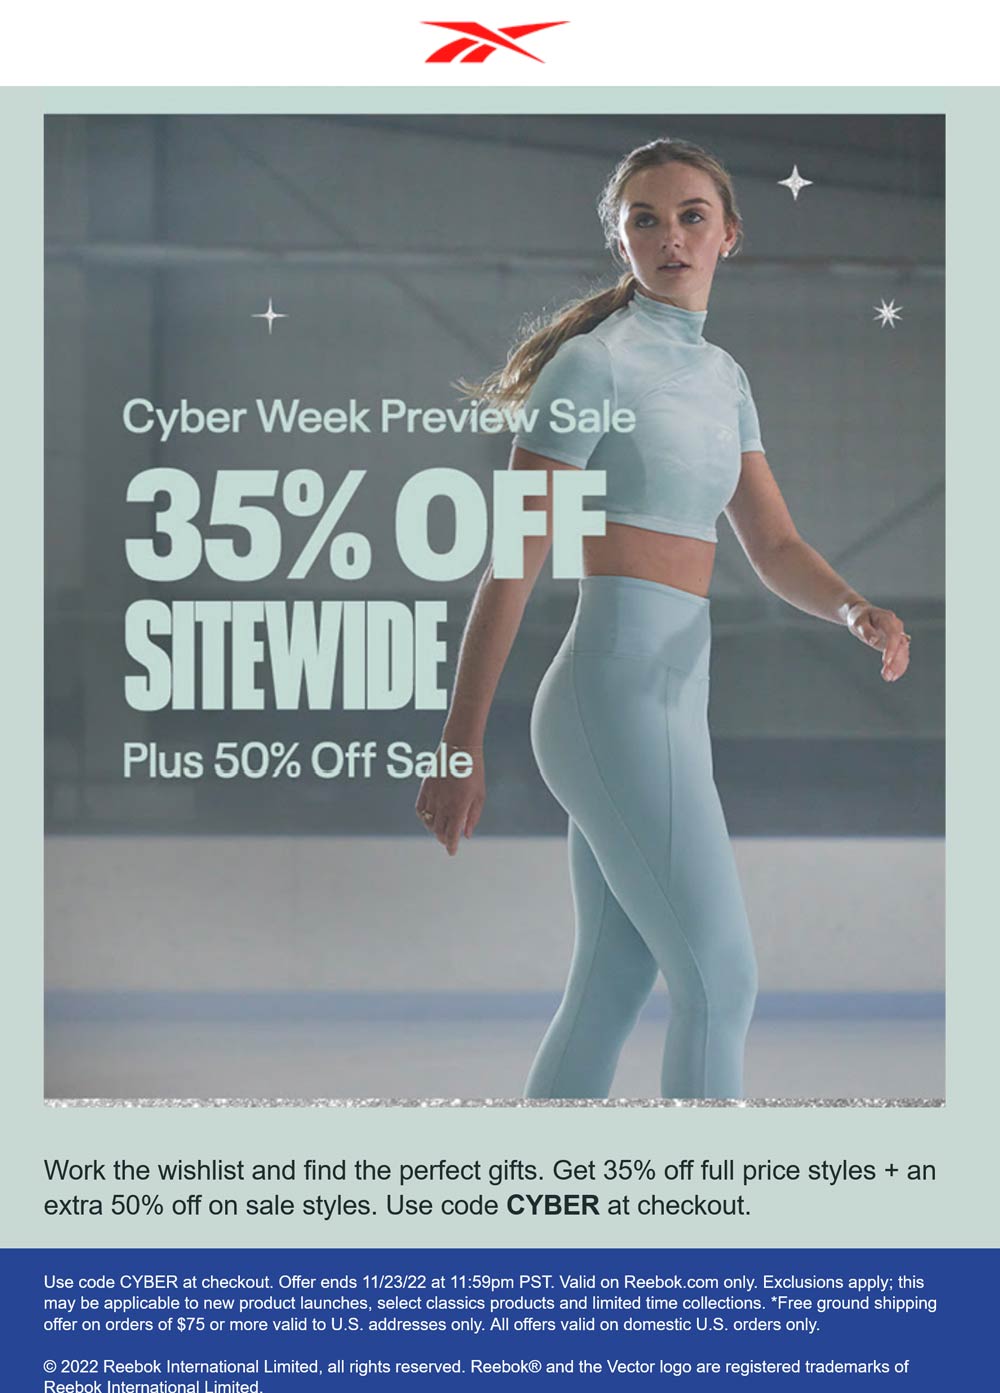 Reebok stores Coupon  35% off regular & extra 50% off sale items online at Reebok via promo code CYBER #reebok 